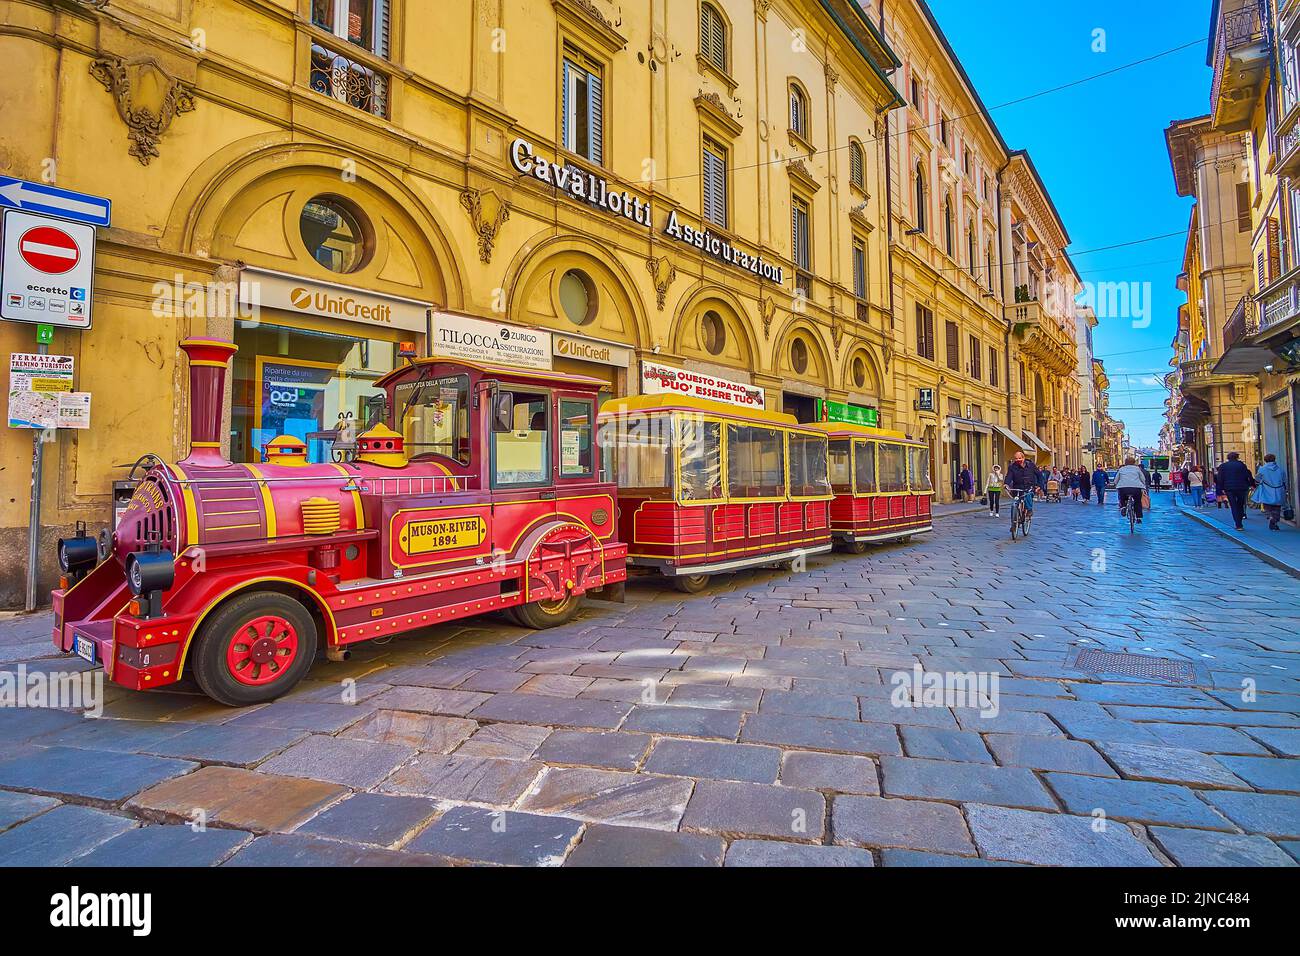 PAVIA, ITALY - APRIL 9, 2022: The tourist tram on Corso Strada Nuova street in old town, on April 9 in Pavia, Italy Stock Photo